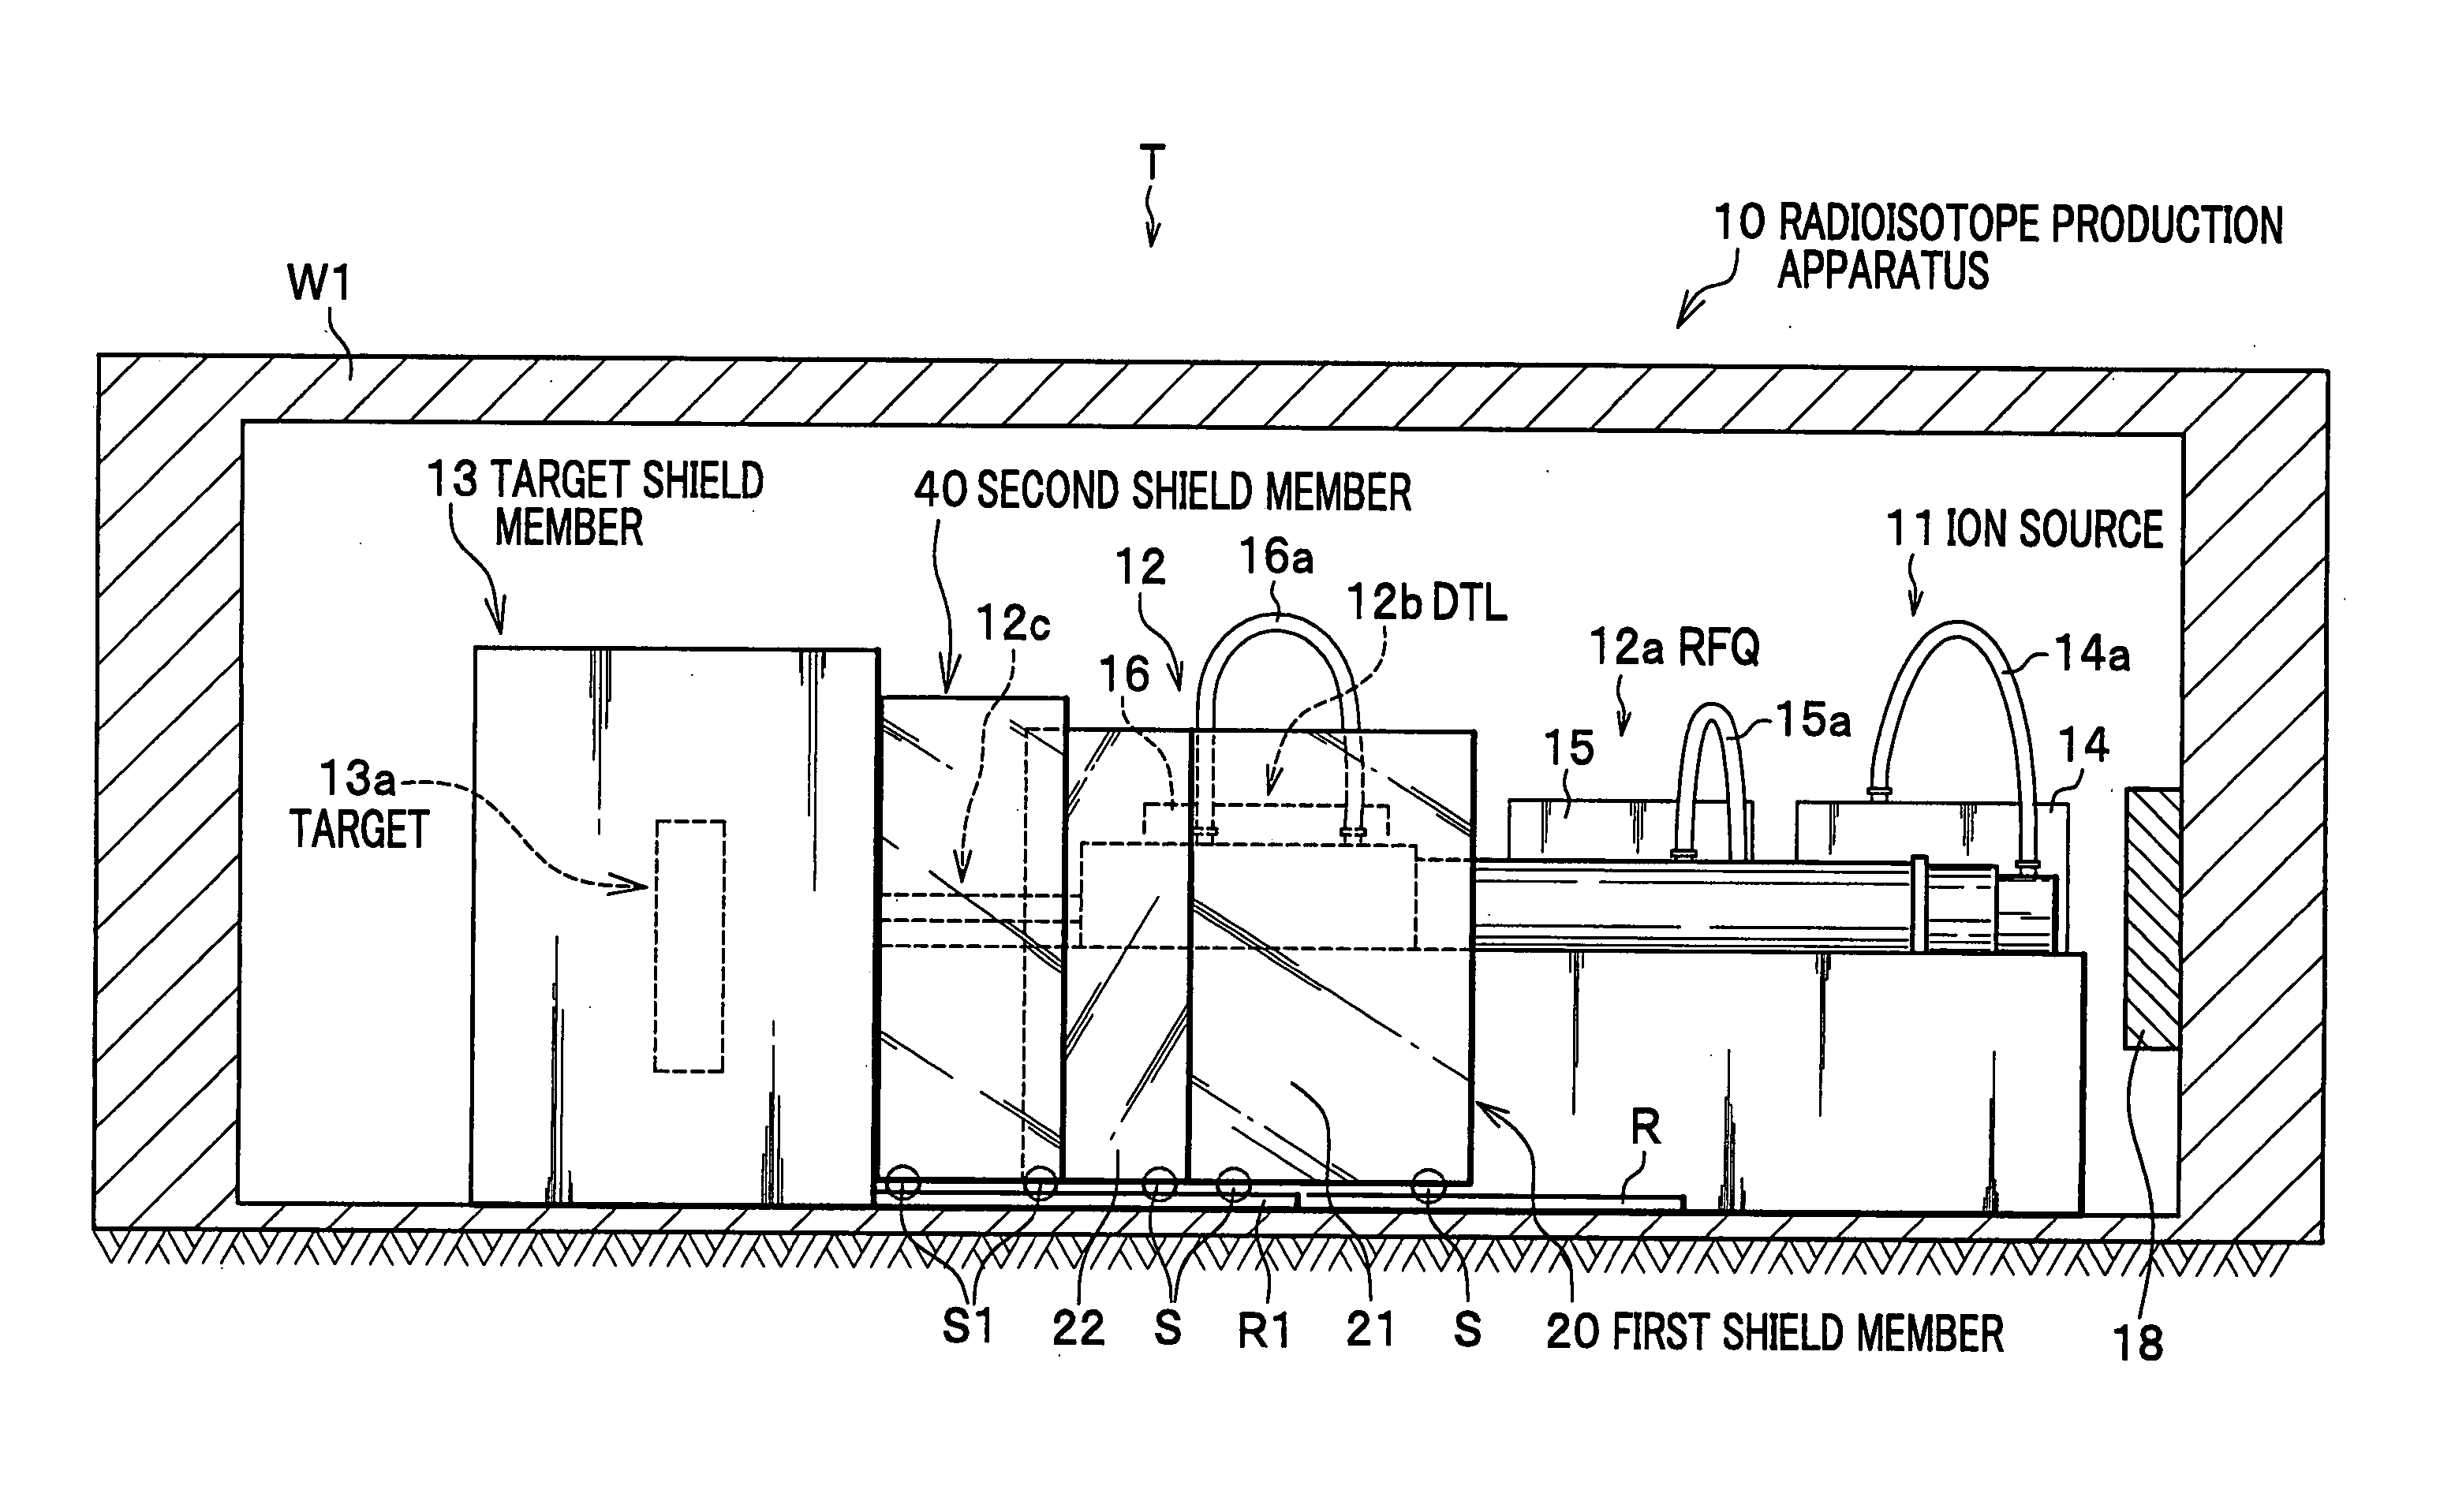 Radiosotope production apparatus and radiopharmaceutical production apparatus